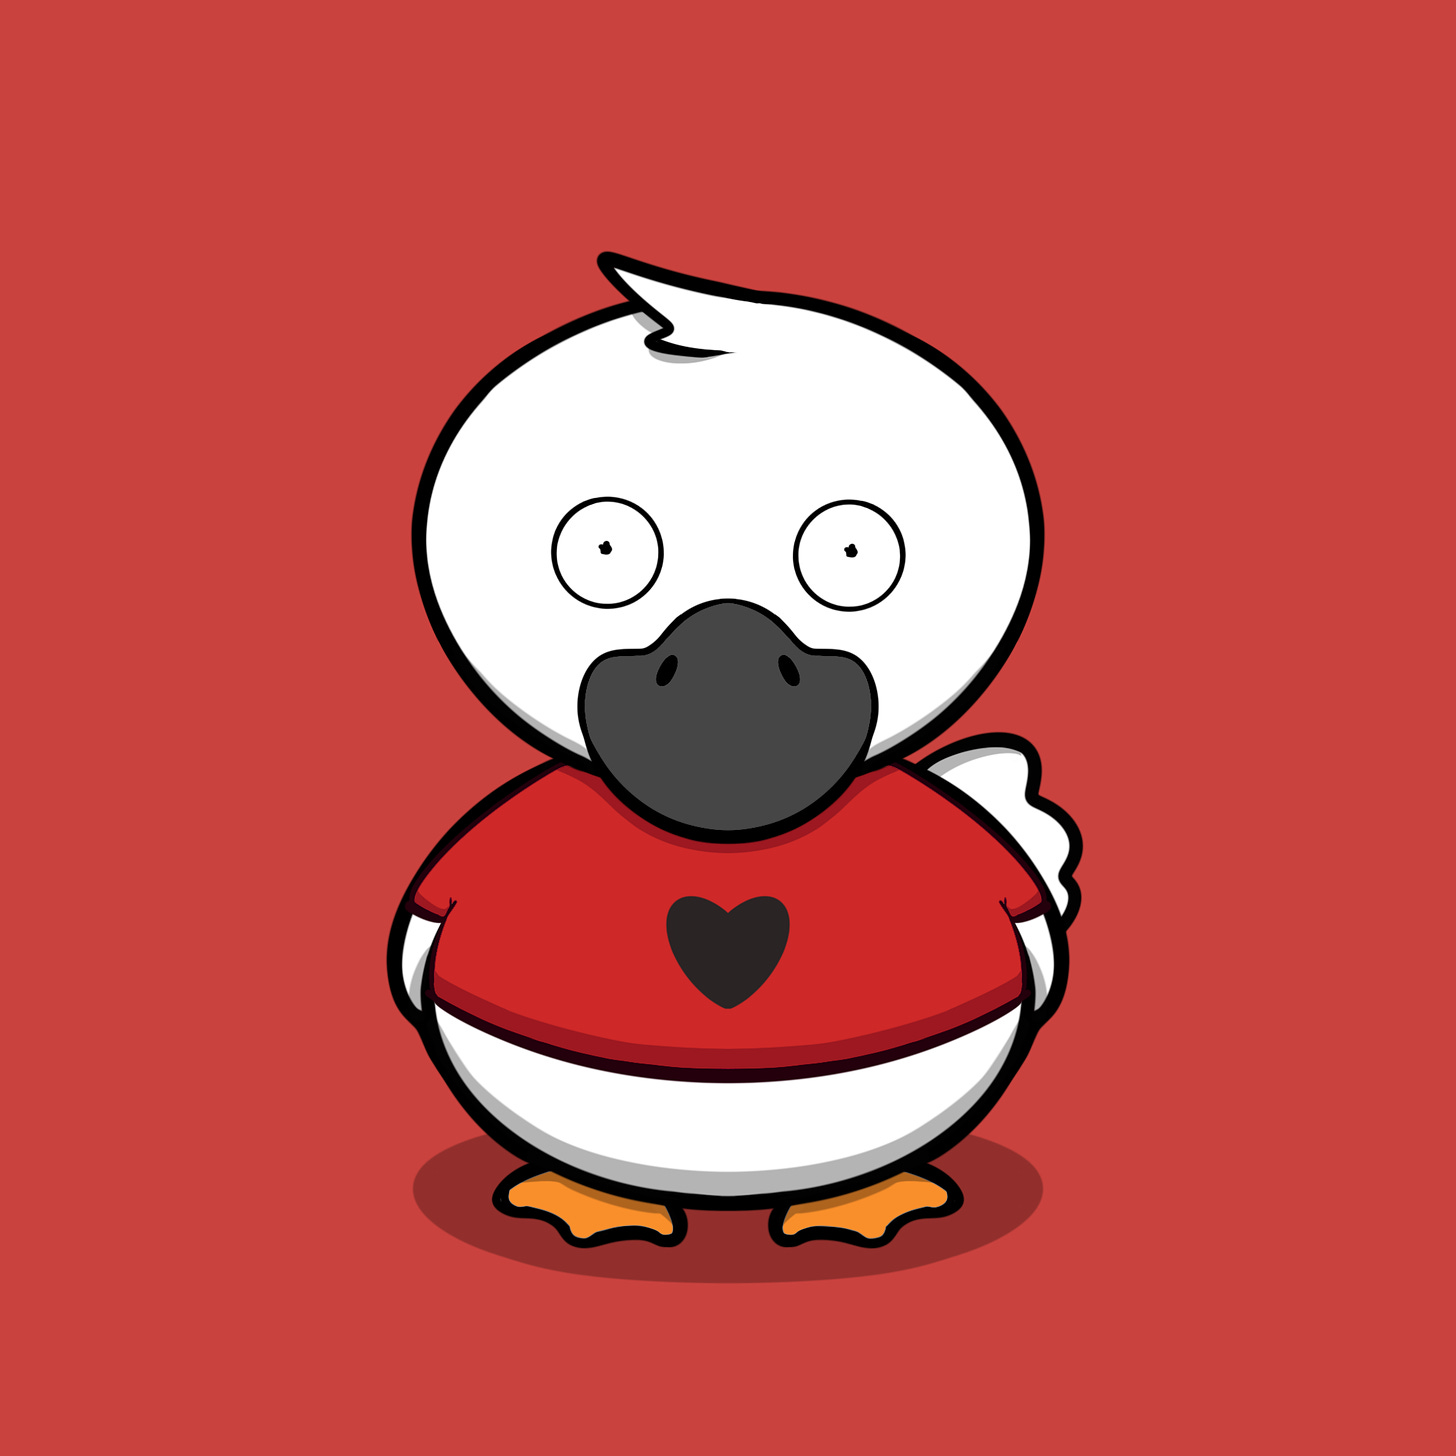 A cartoon duck with a heart shirt on a red background.